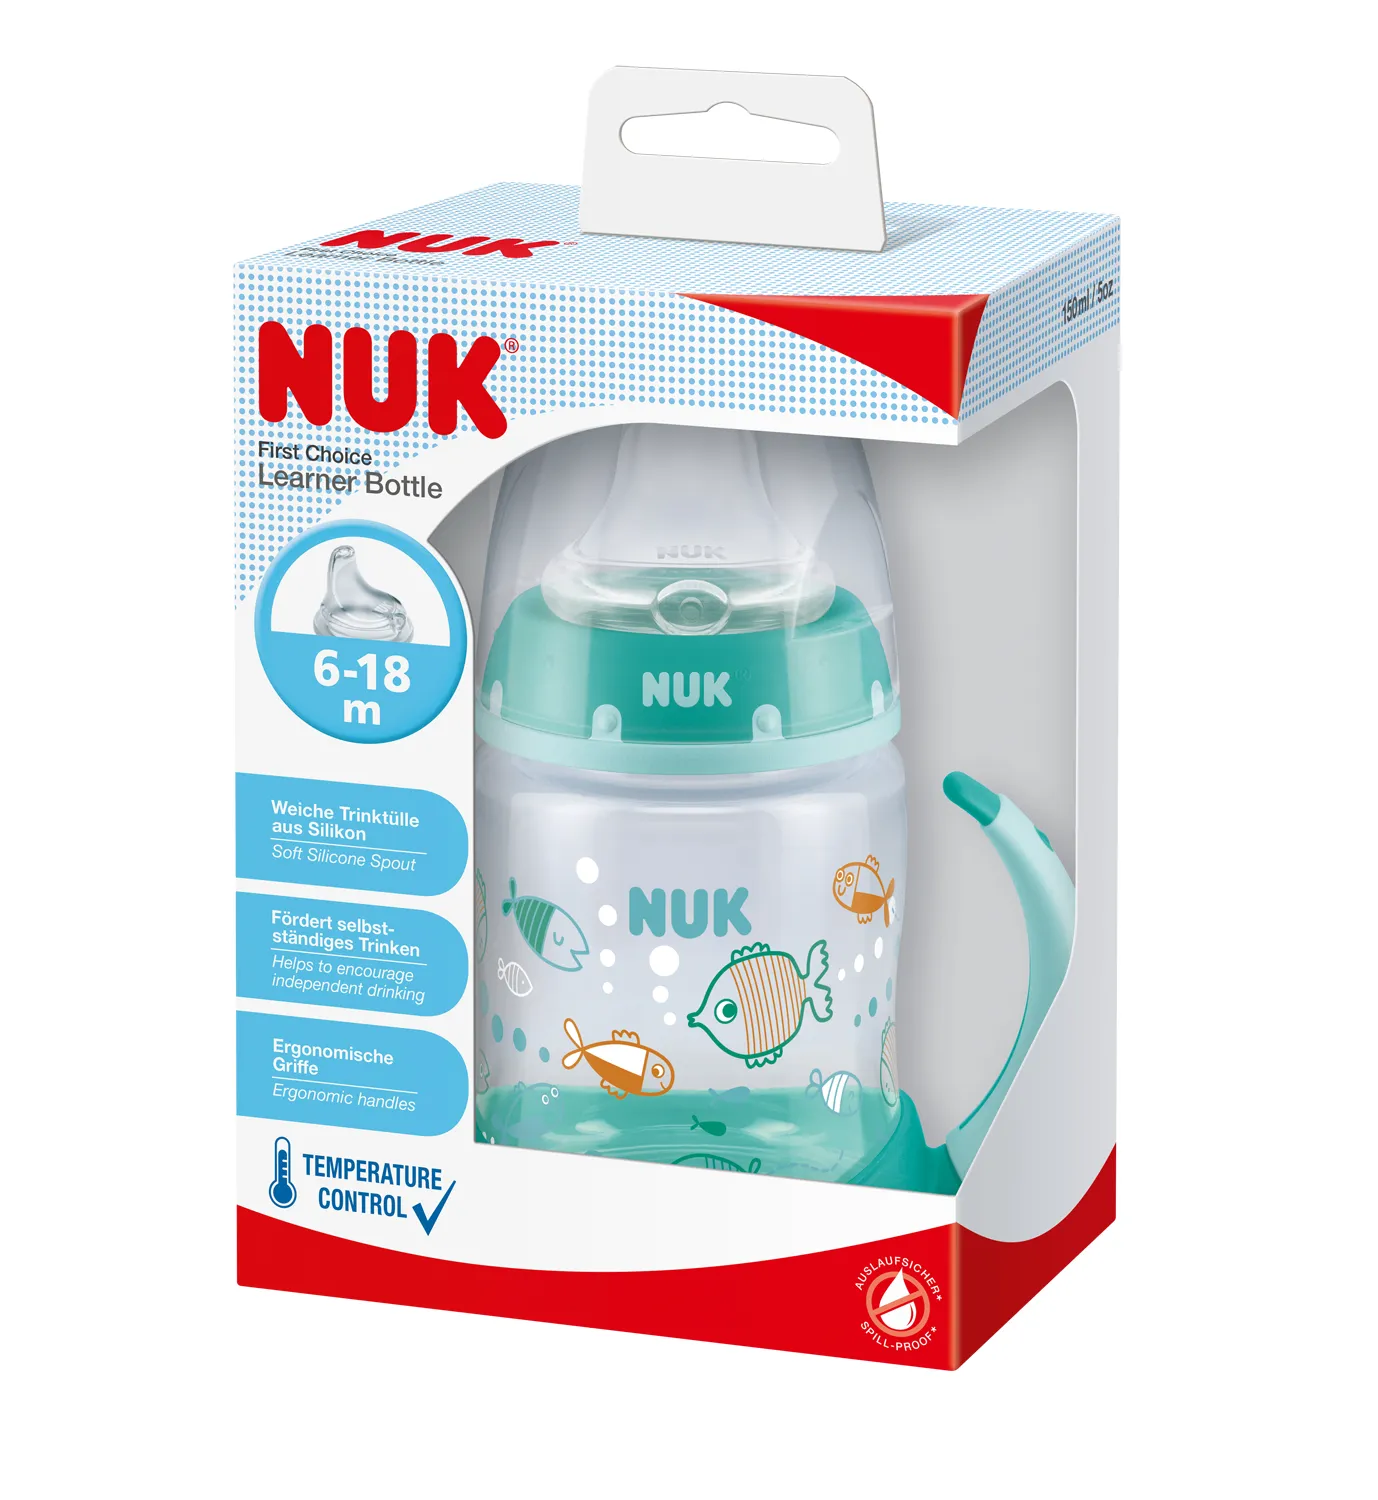 Nuk First Choice 150ml Learner Bottle *Assorted